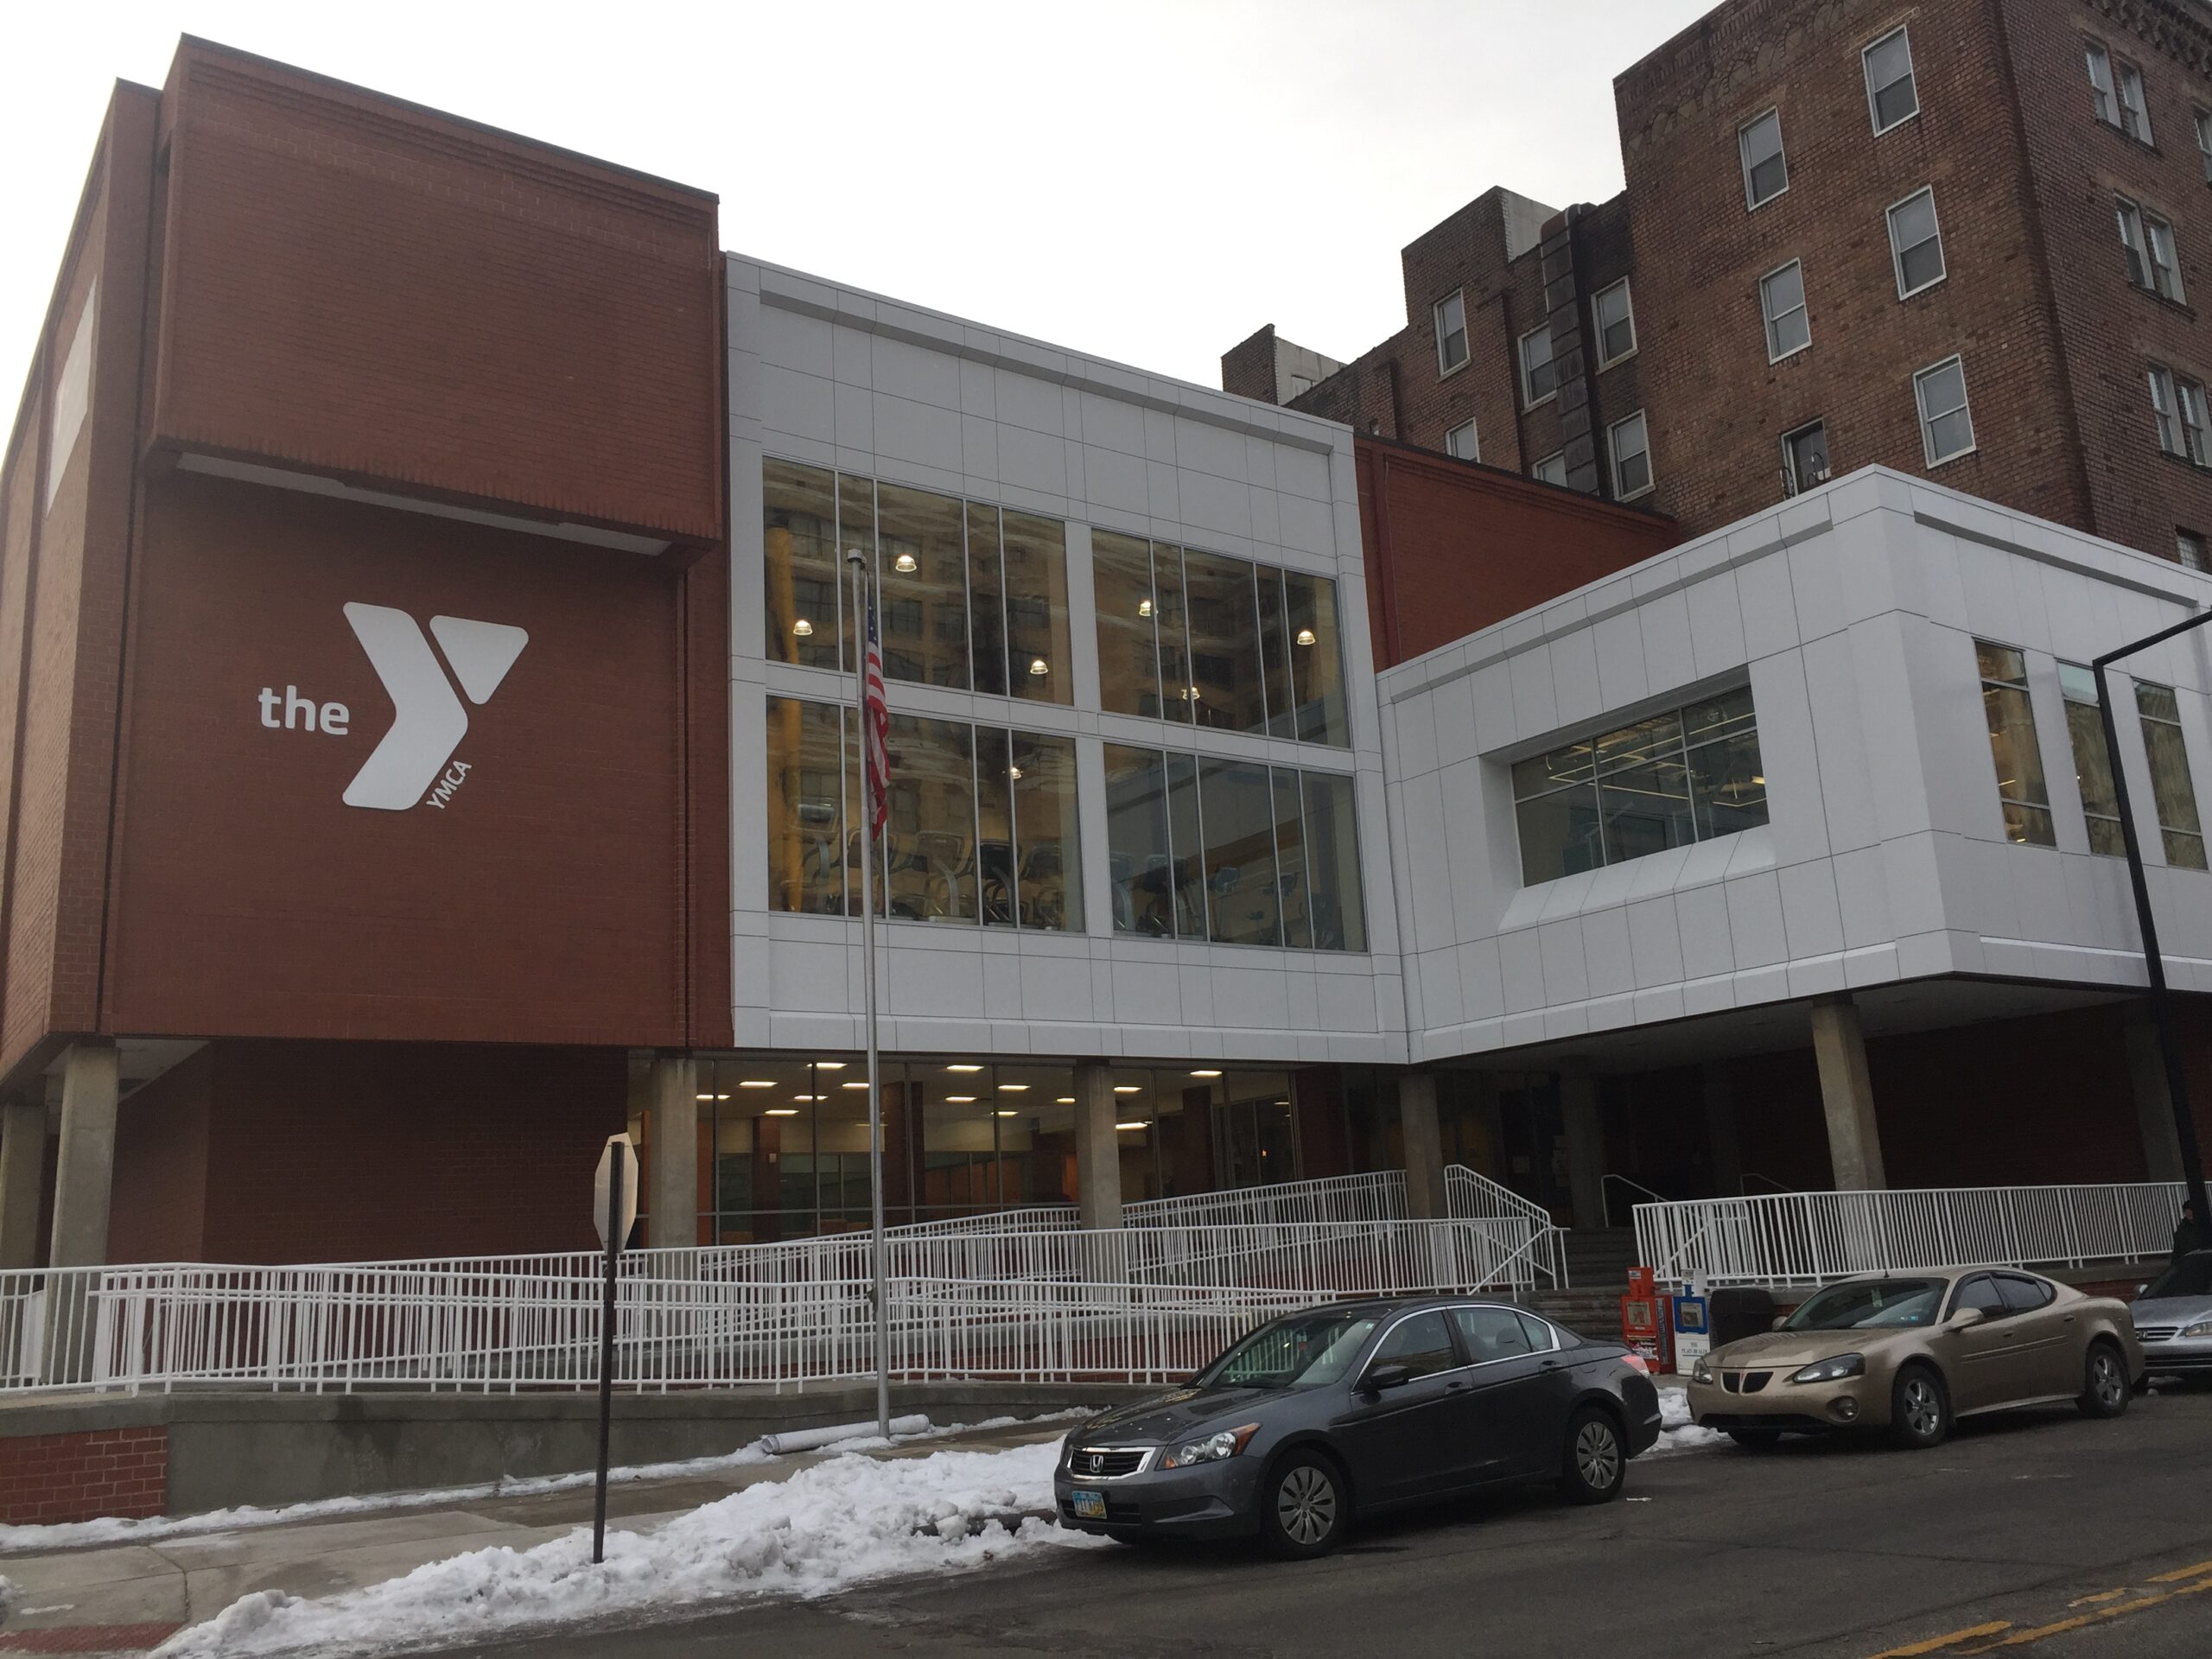 Youngstown Central YMCA Renovation